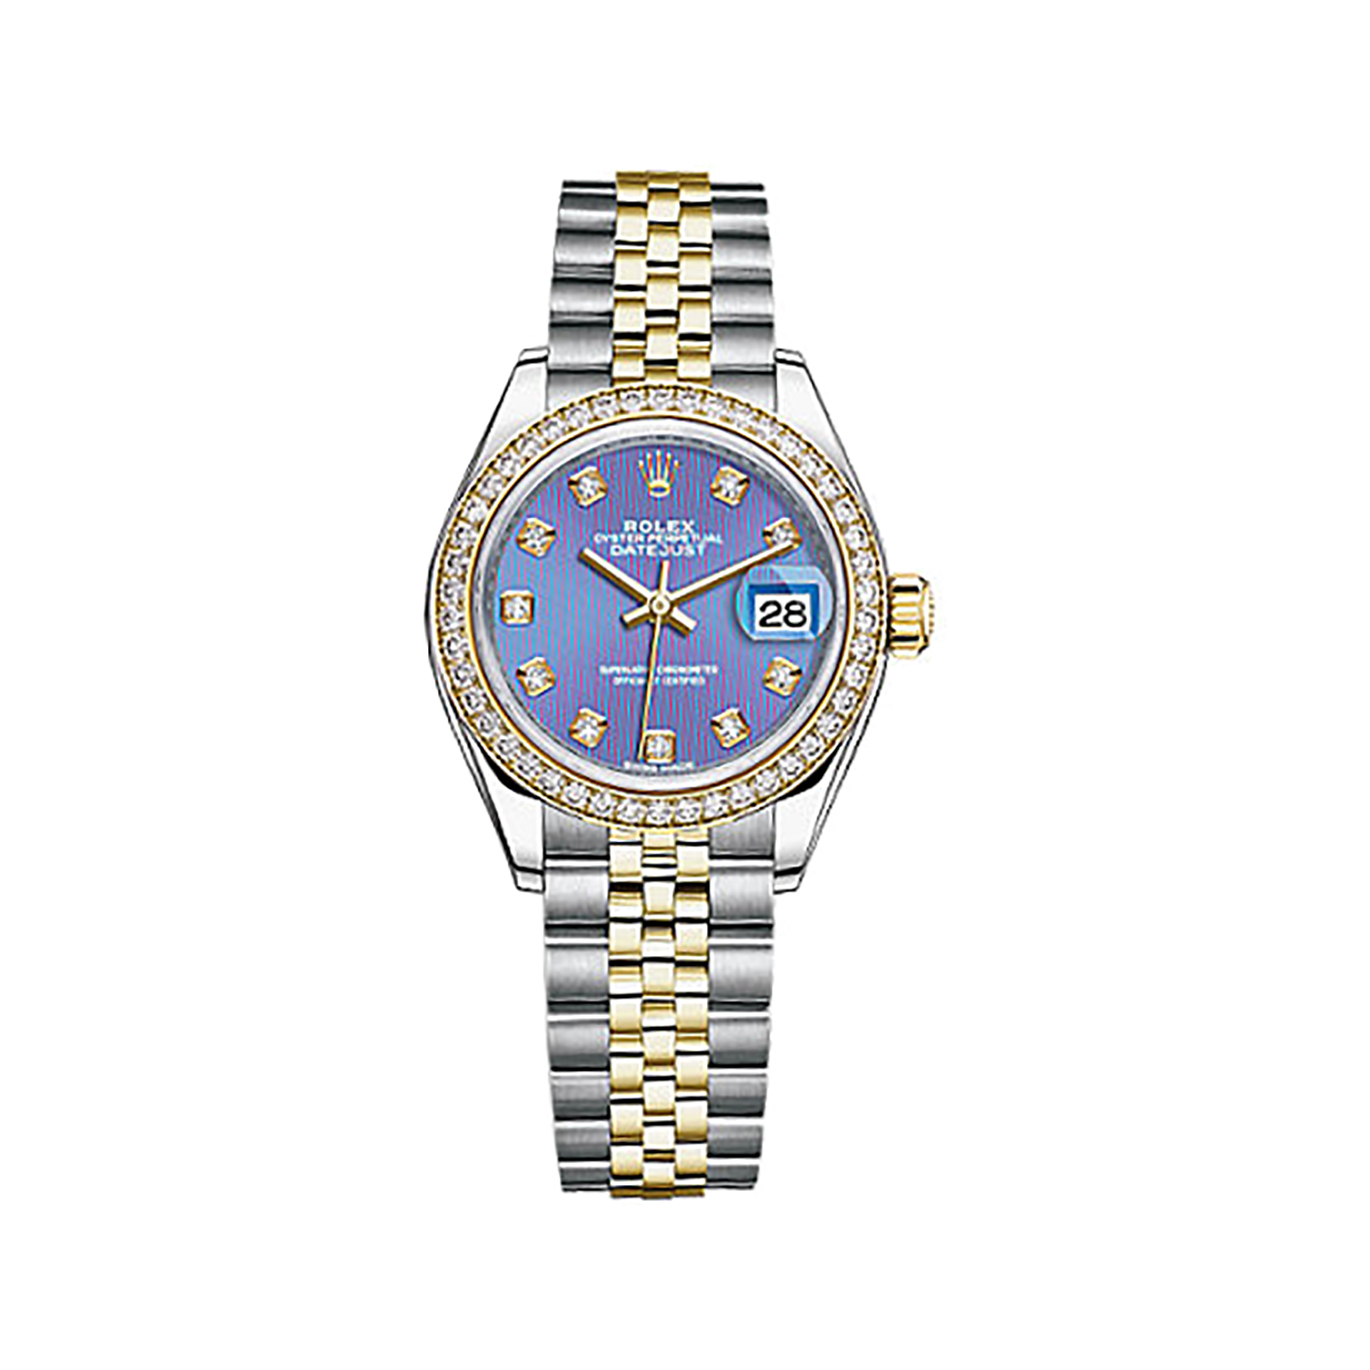 Lady-Datejust 28 279383RBR Gold & Stainless Steel & Diamonds Watch (Lavender Set with Diamonds)